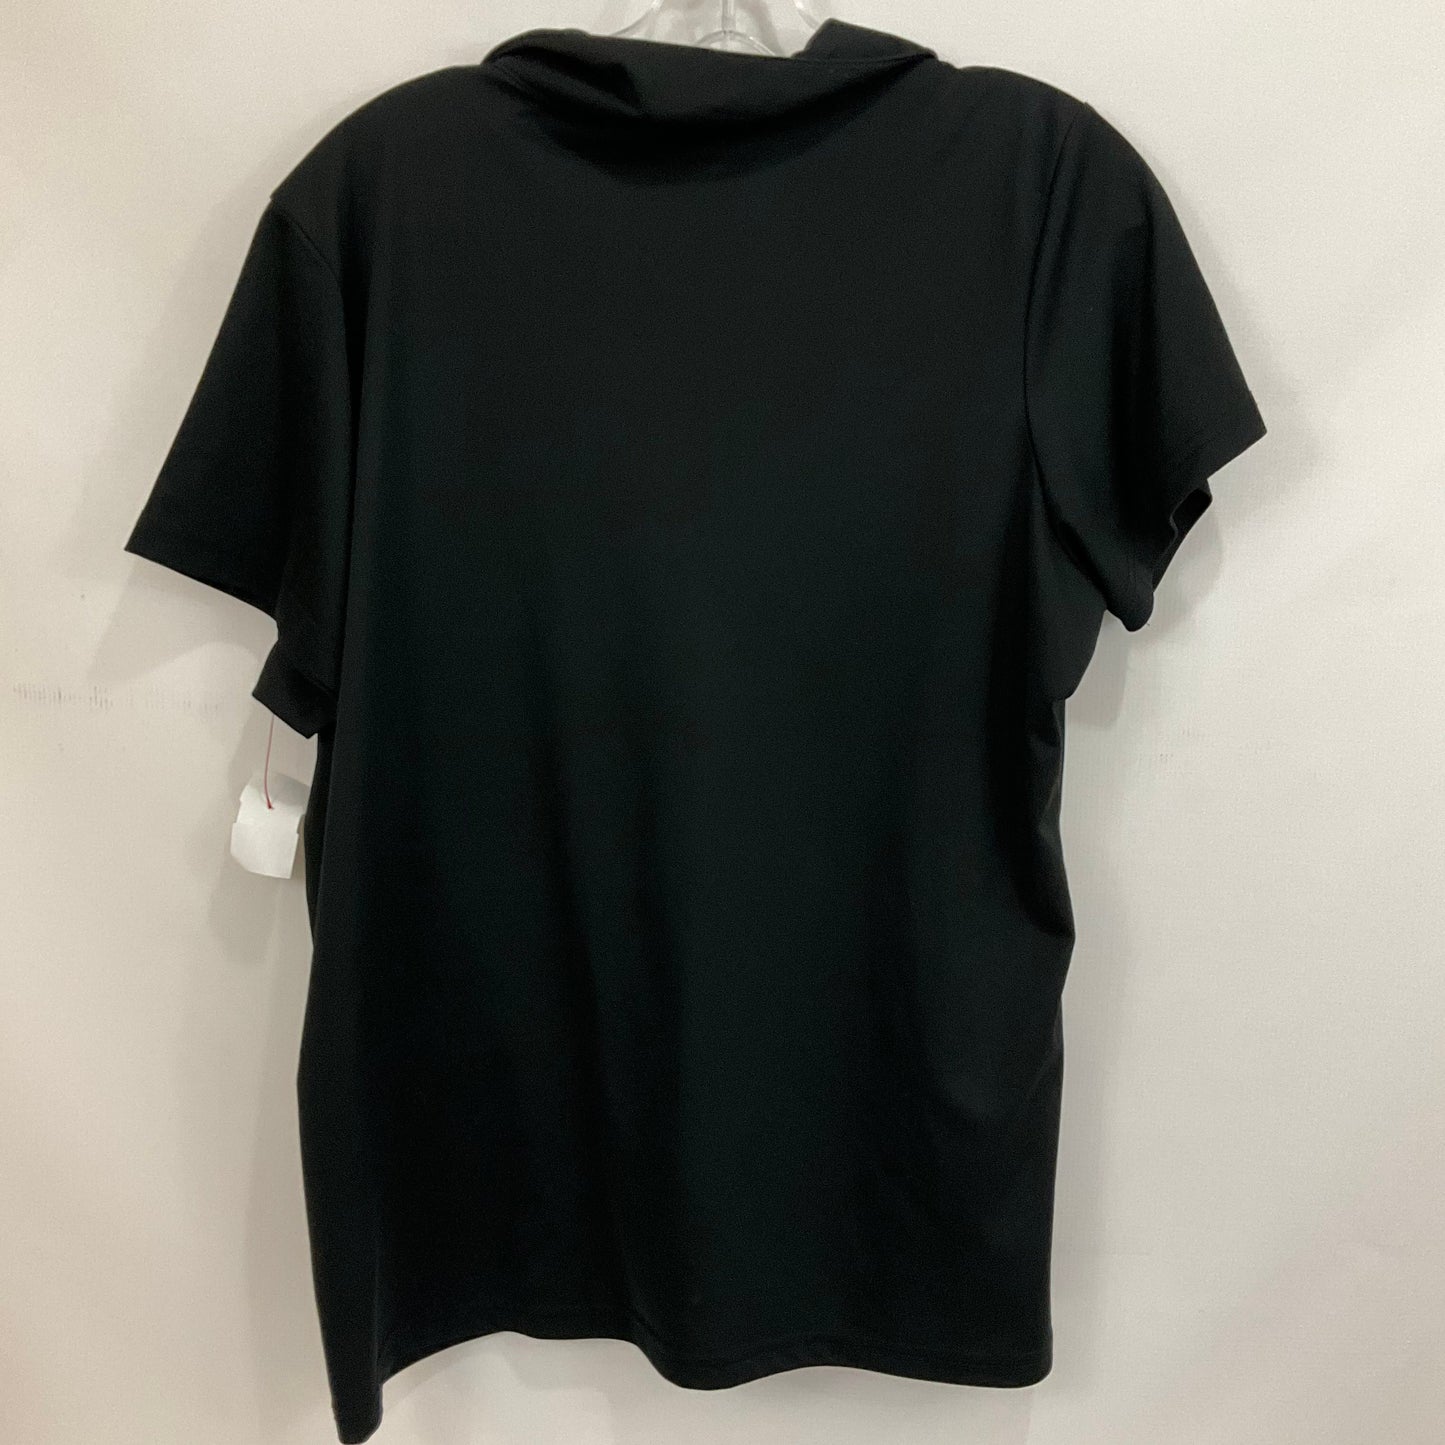 Black Athletic Top Short Sleeve Clothes Mentor, Size 2x